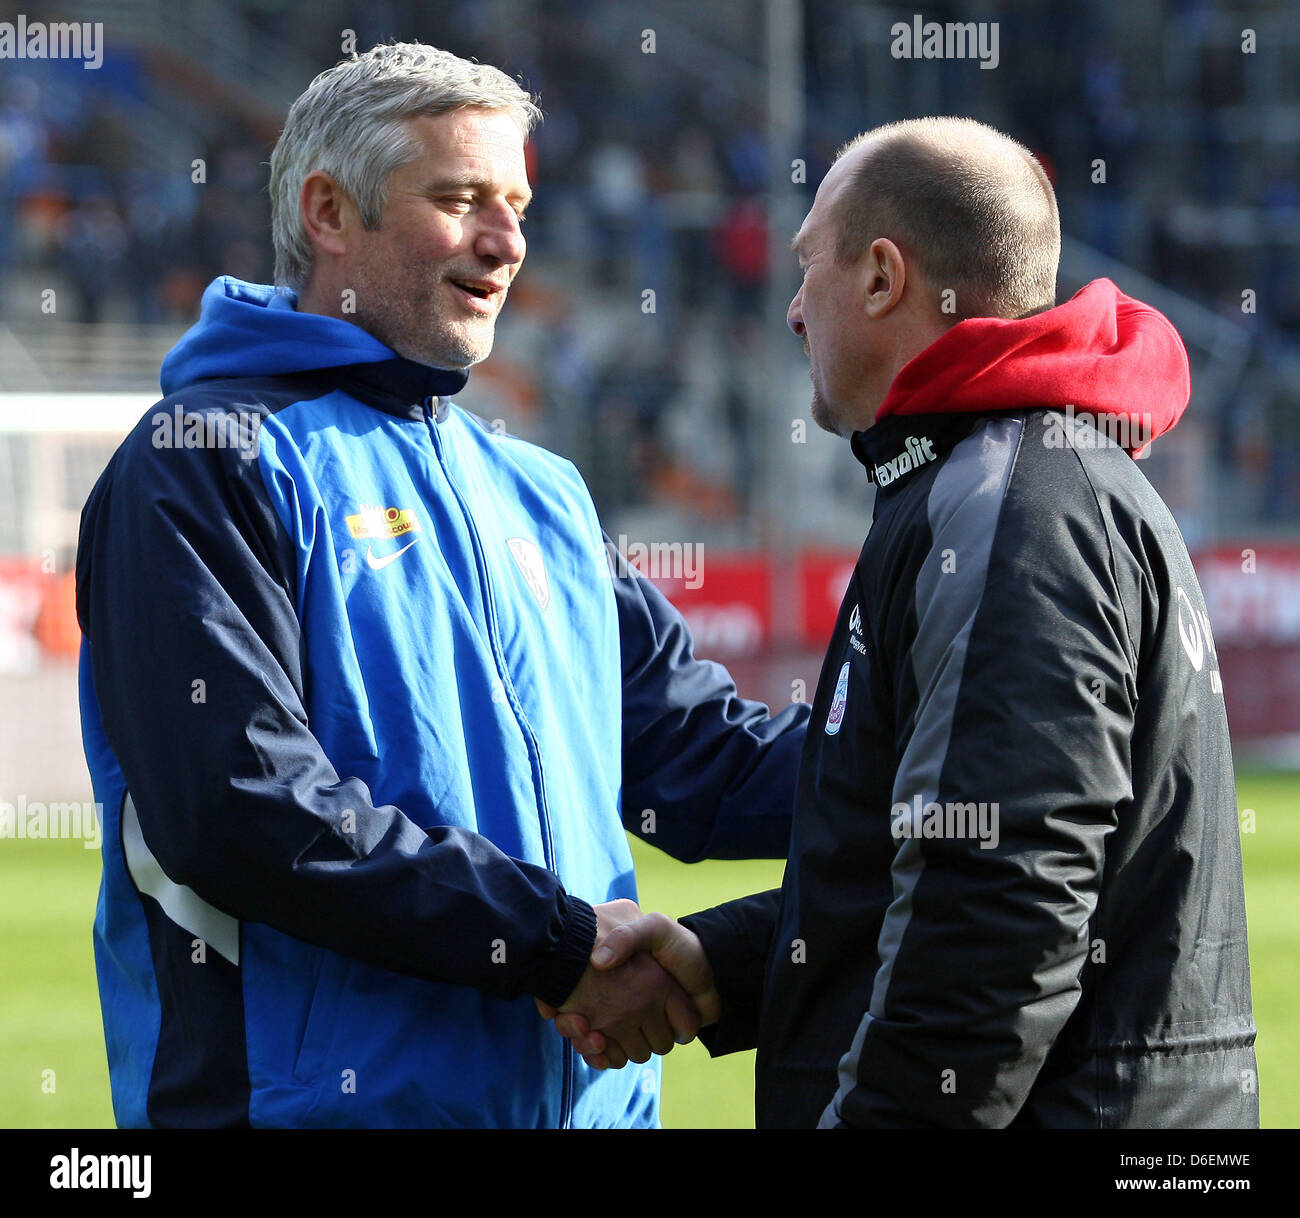 Bochum's head coach Andreas Bergmann (L) and Rostock's head coach Wolfgang Wolf shake hands prior to the German Bundesliga second devision match between VfL Bochum and Hansa Rostock at rewirpowerStadion in Bochum, Germany, 05 February 2012. Photo: Kevin Kurek Stock Photo